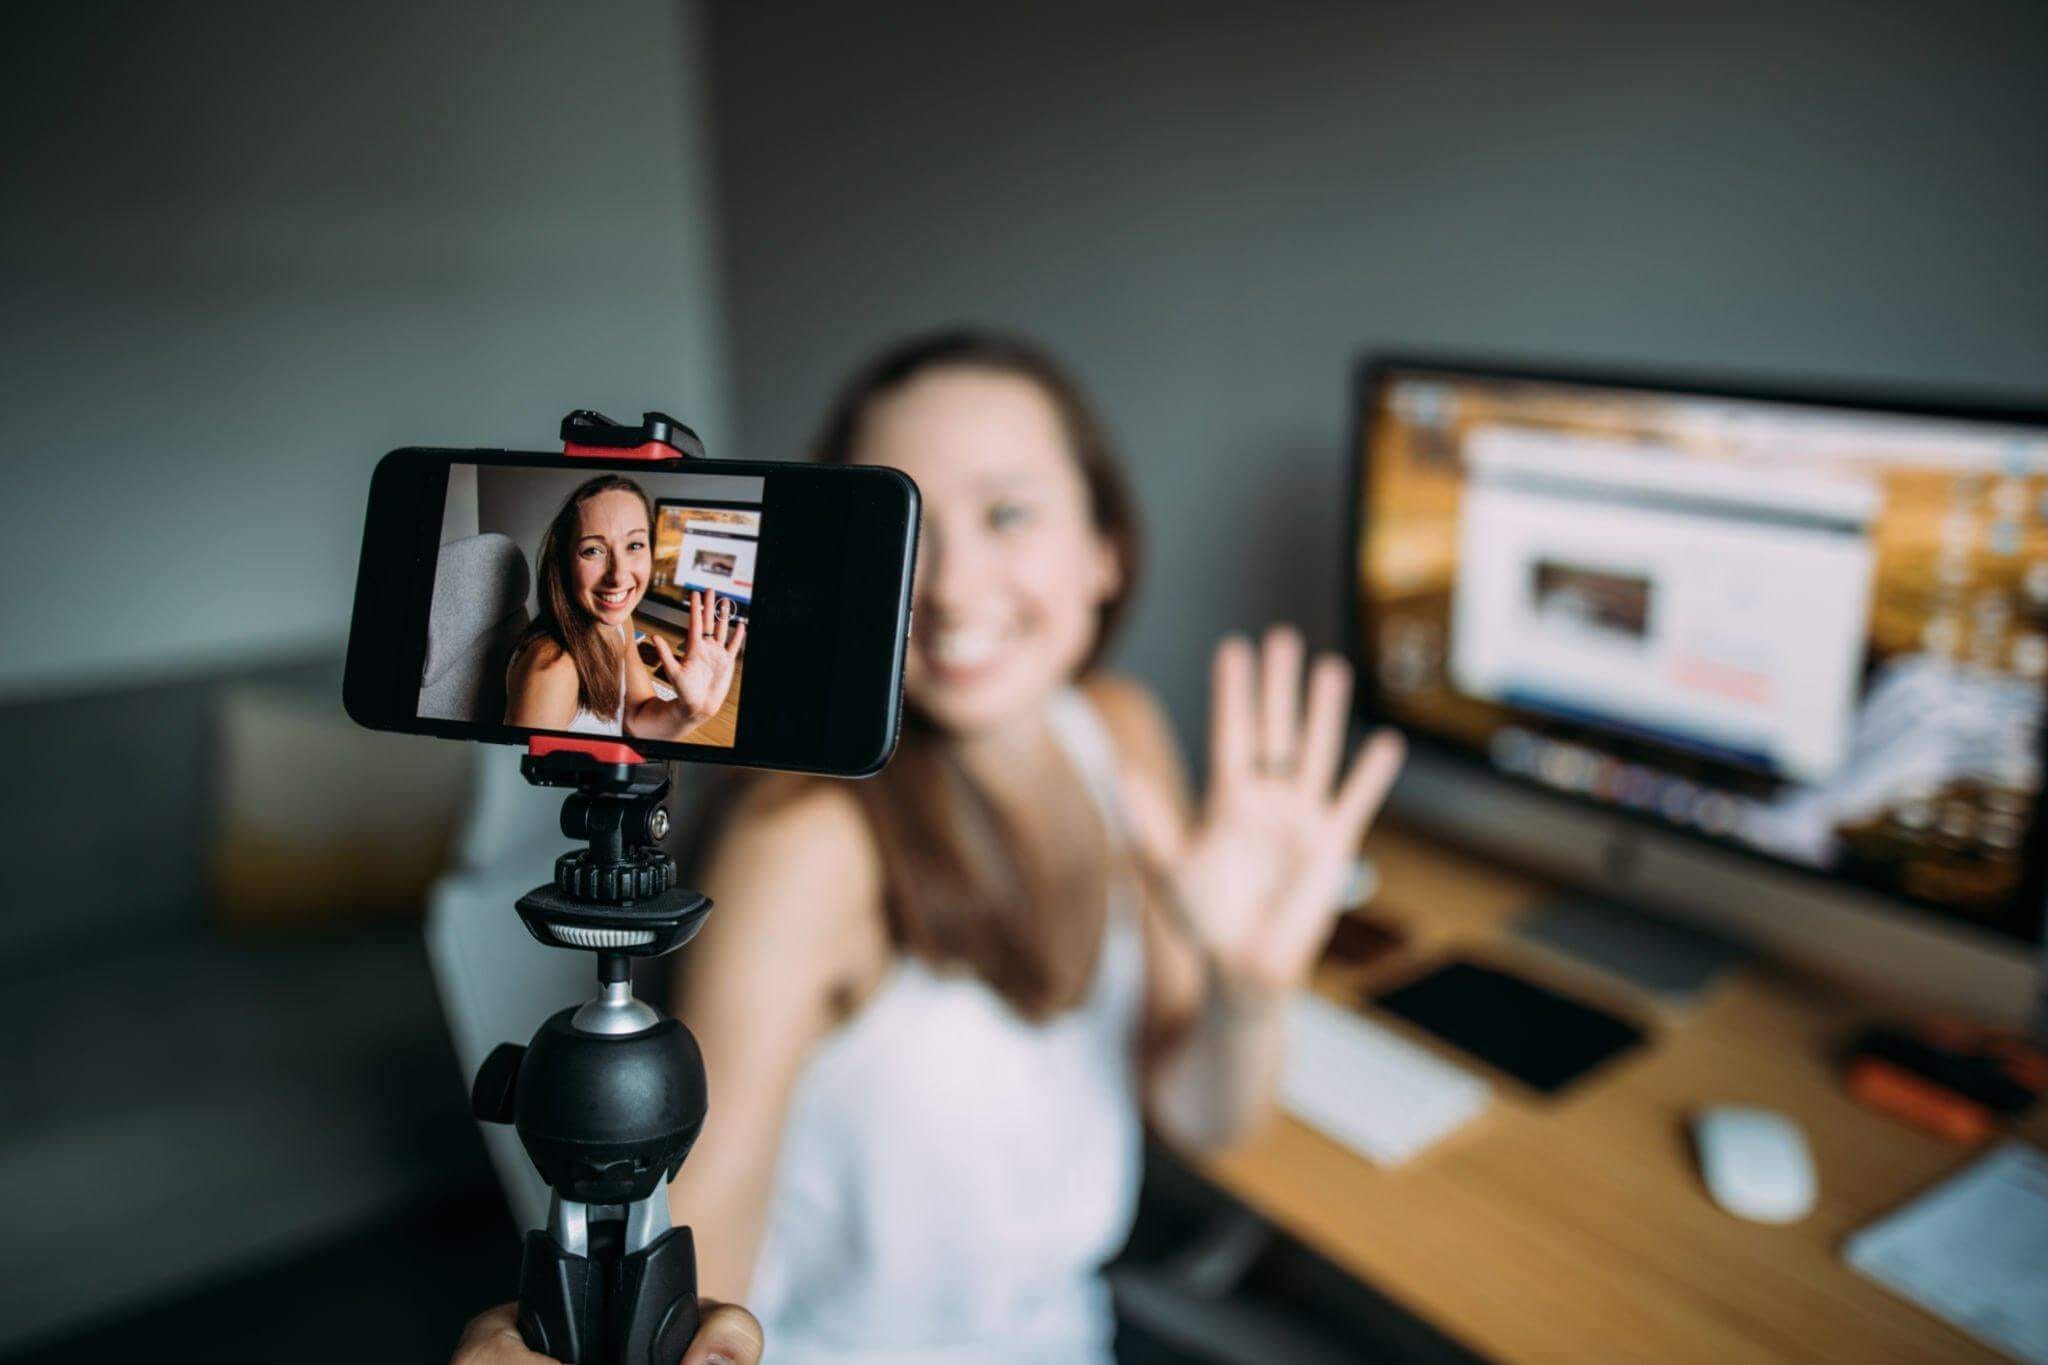 How can you balance an influencer’s content relevance and storytelling ability